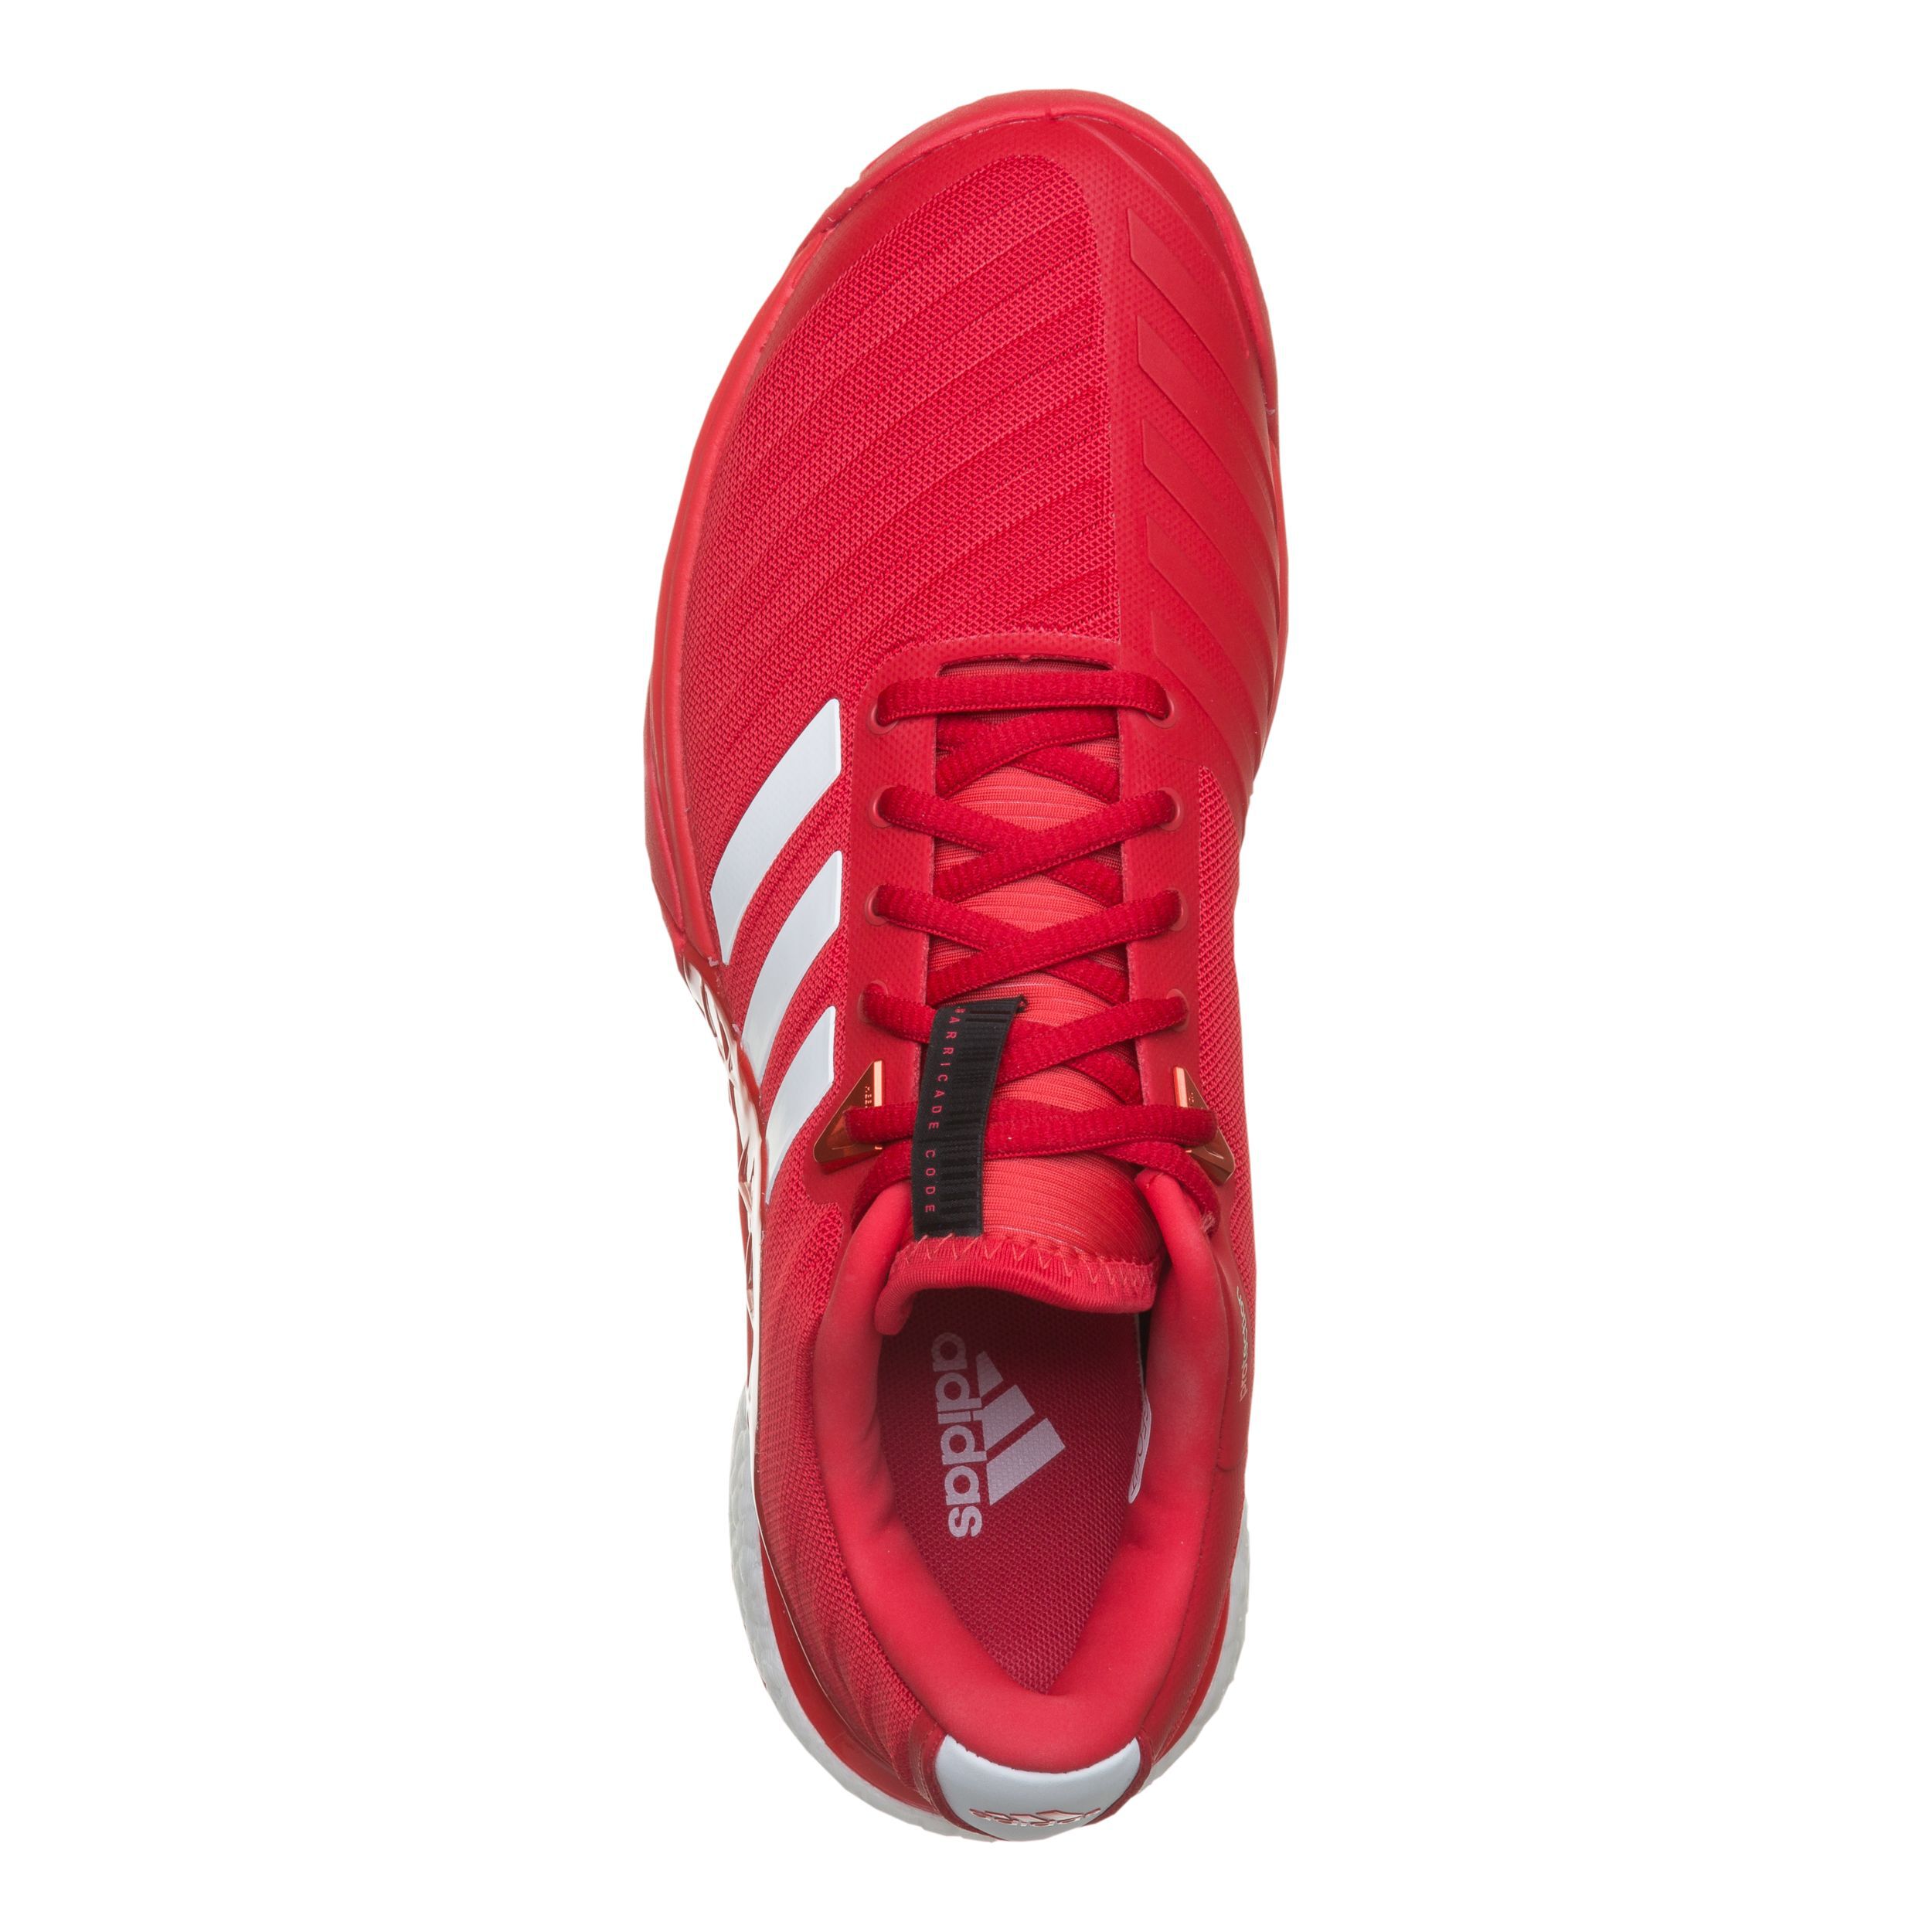 adidas Barricade 2018 Boost Chaussures Toutes Surfaces Hommes ...